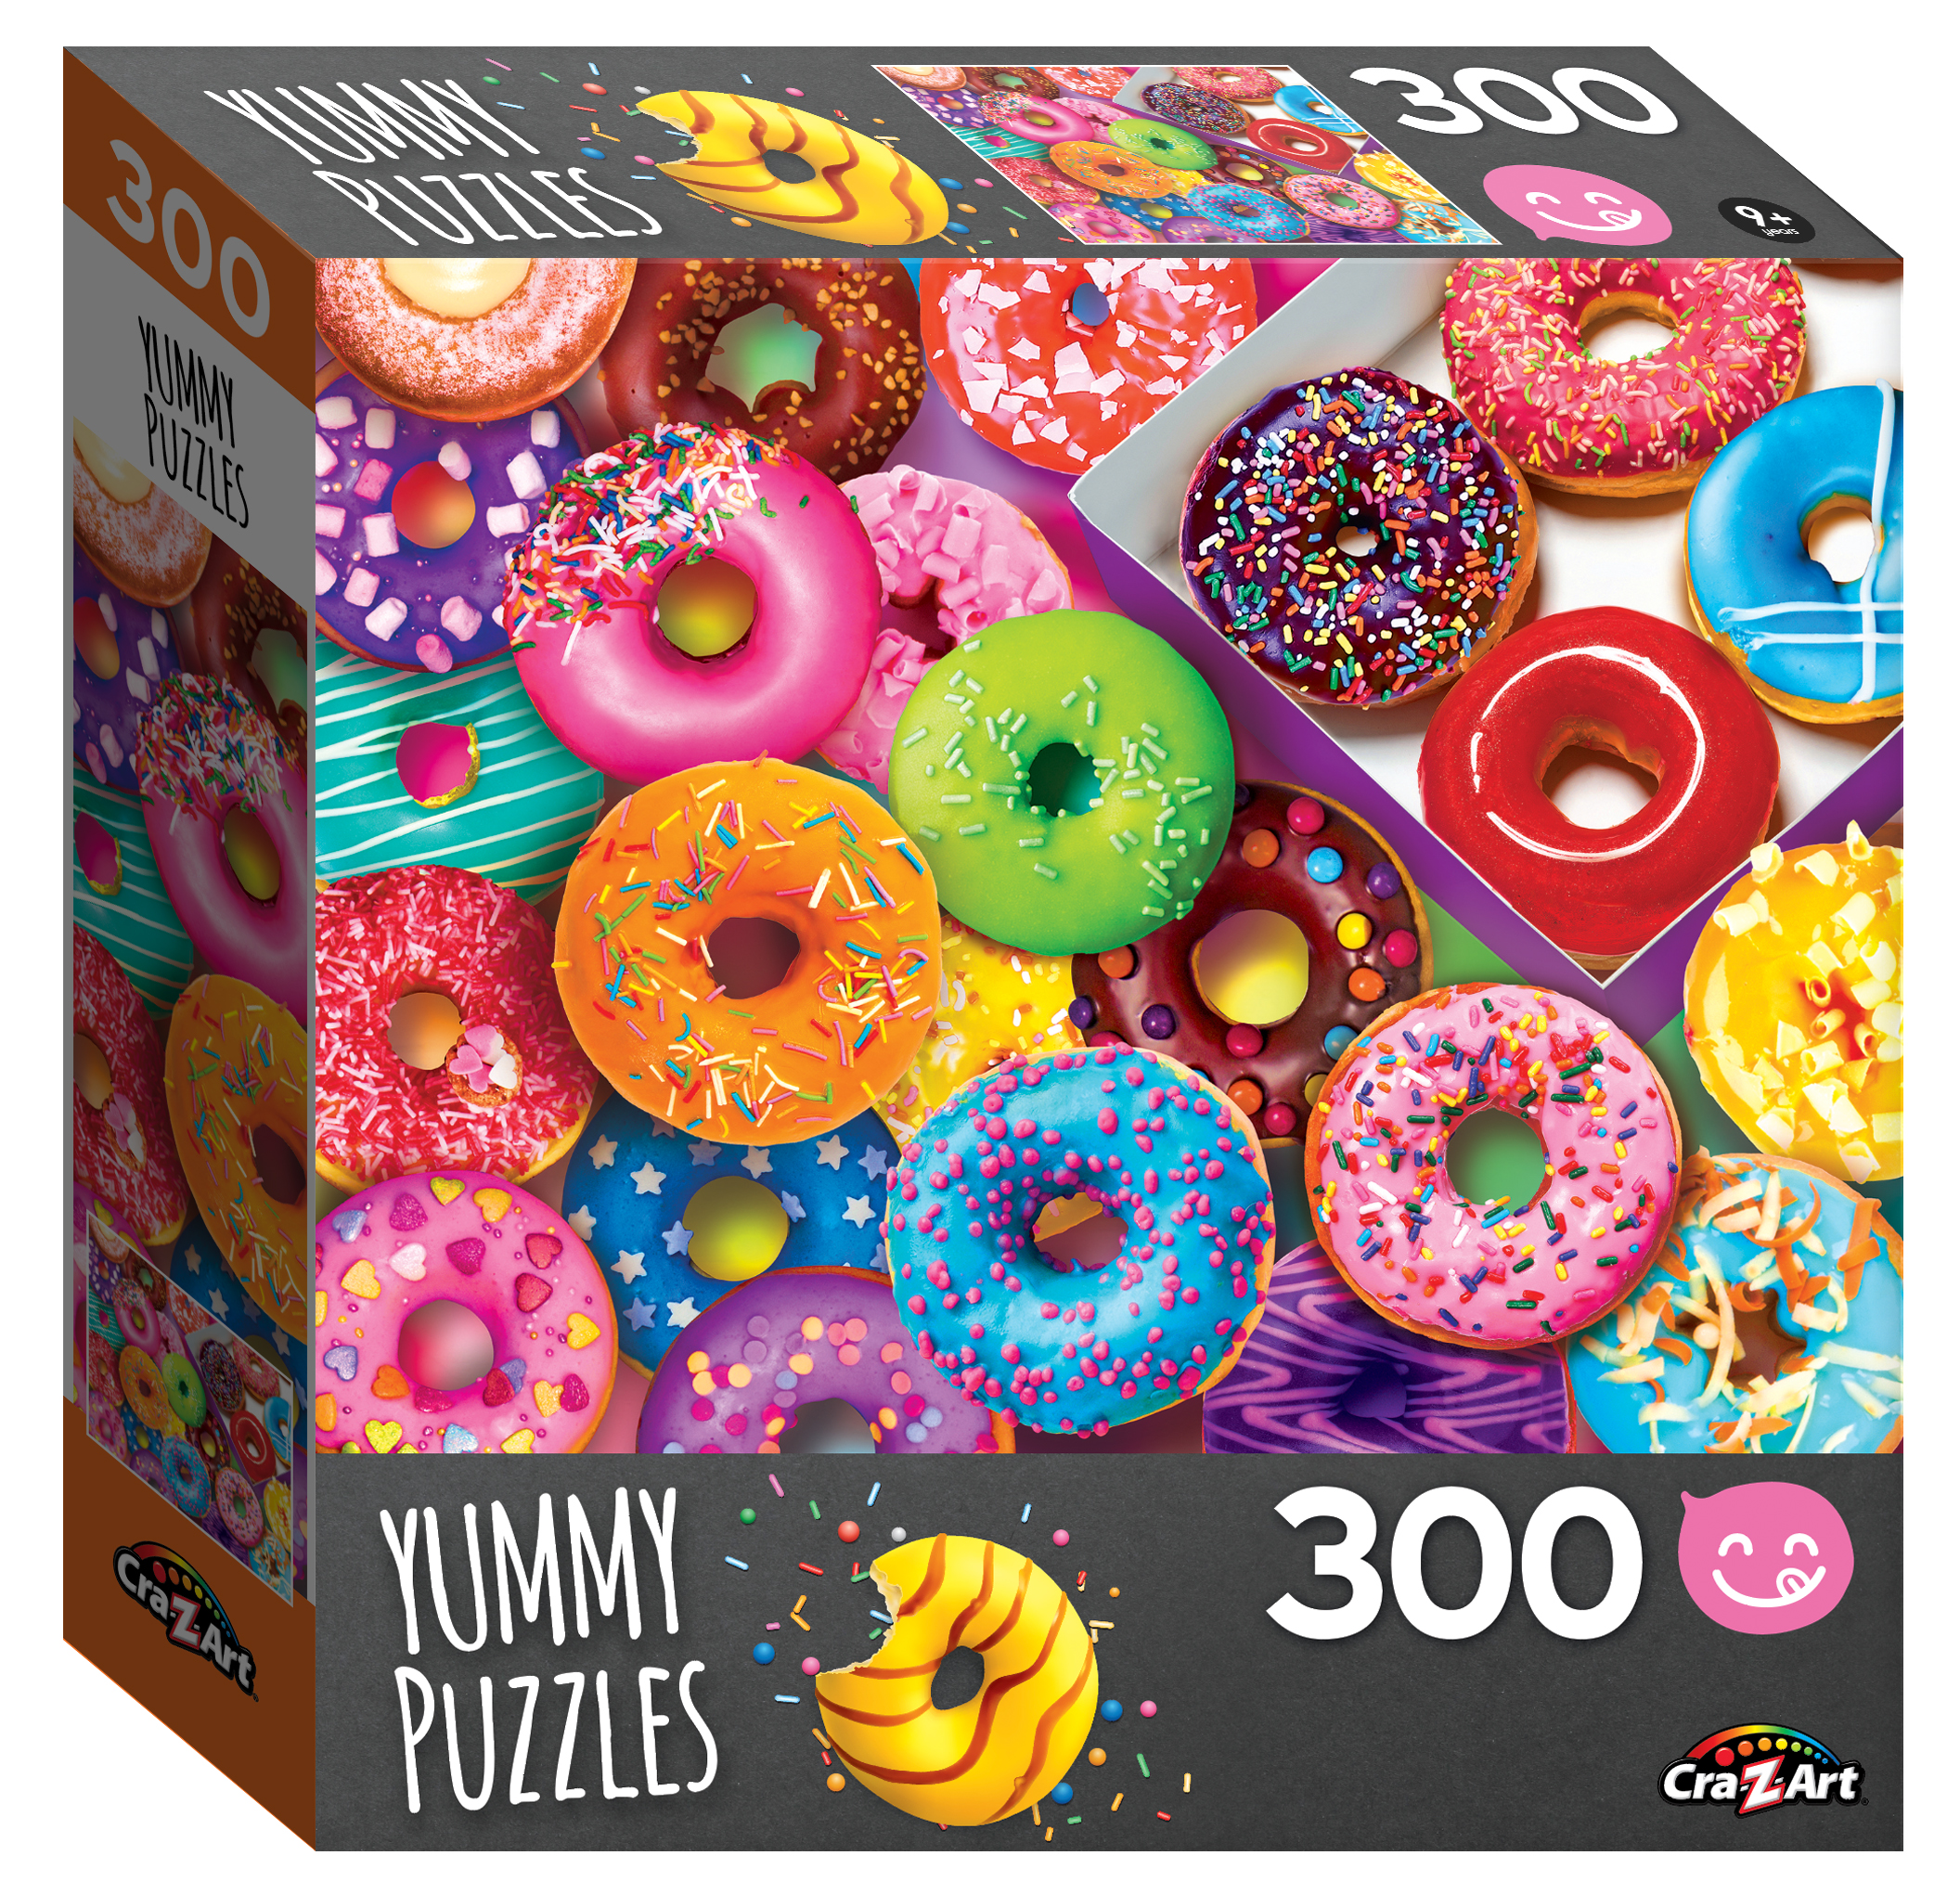 Cra-Z-Art Yummy Puzzles 300-Piece I Love Donuts Jigsaw Puzzle - image 3 of 6